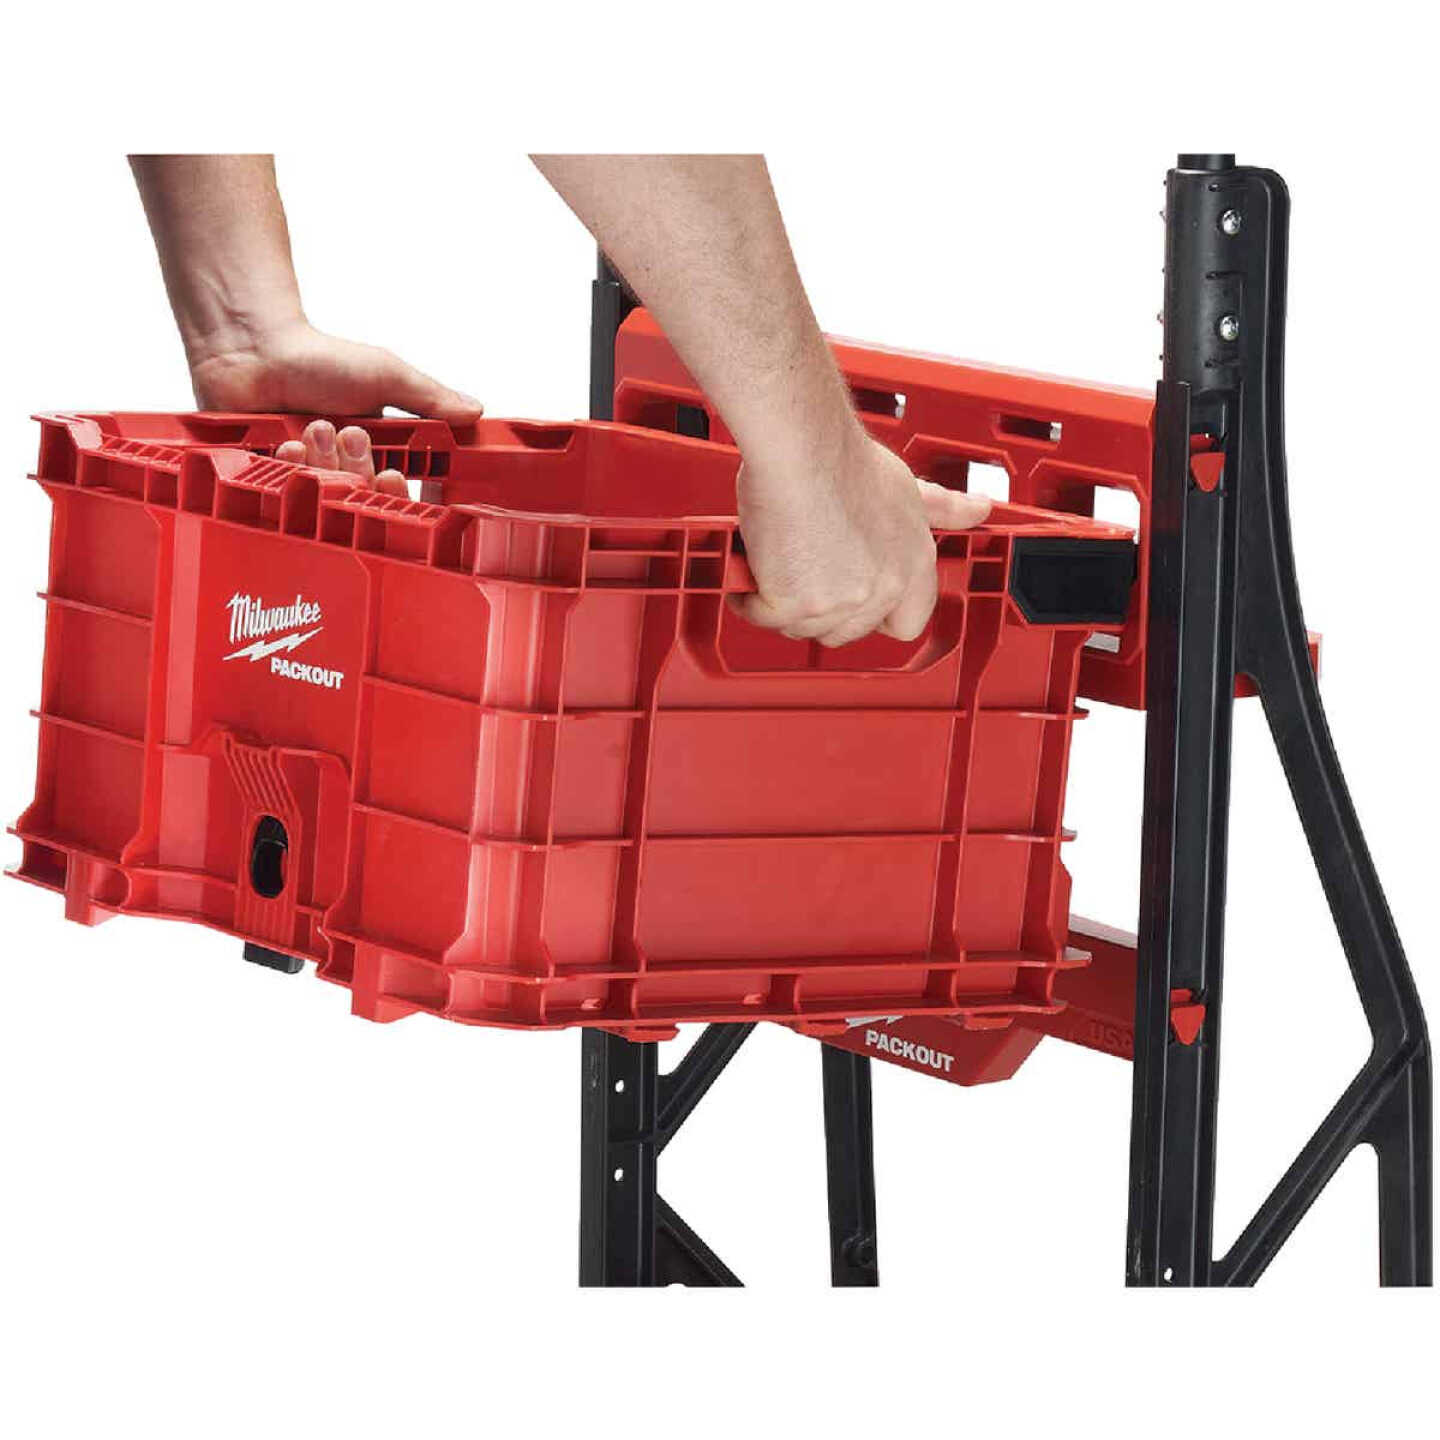 Milwaukee PACKOUT 400 Lb. Capacity Hand Truck - Tahlequah Lumber